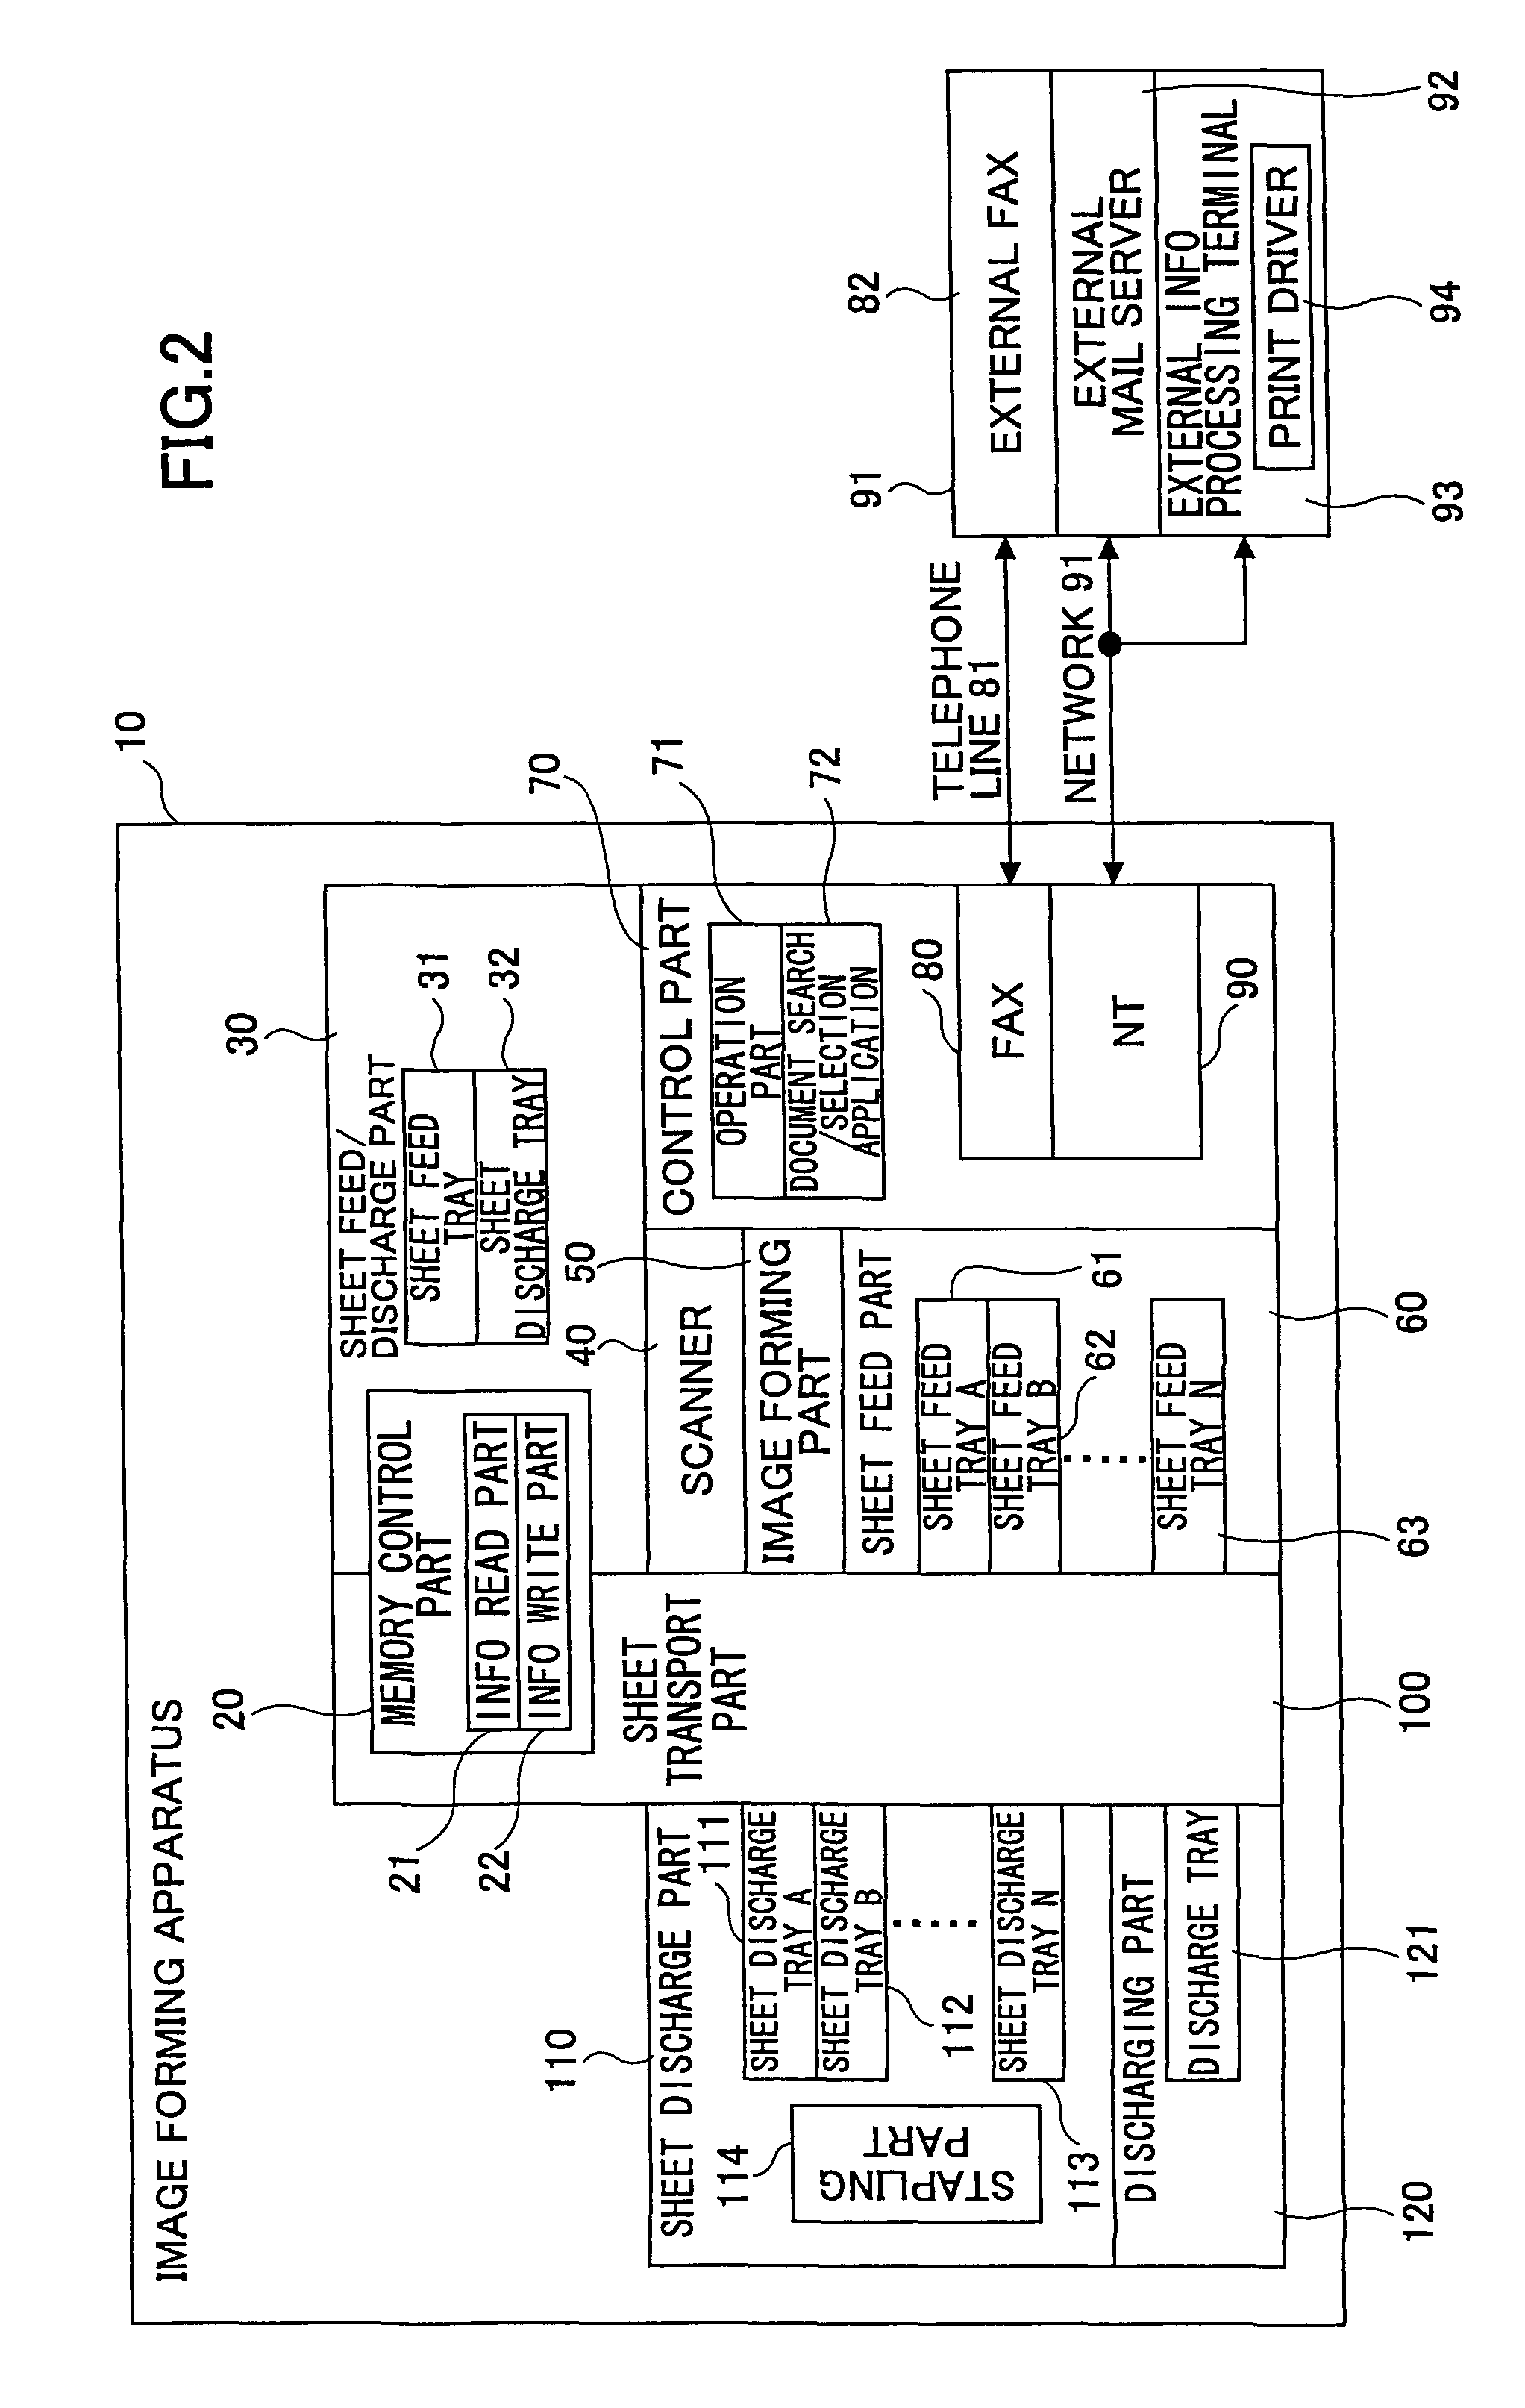 Apparatus capable of using memory-equipped sheet and sheet selection apparatus